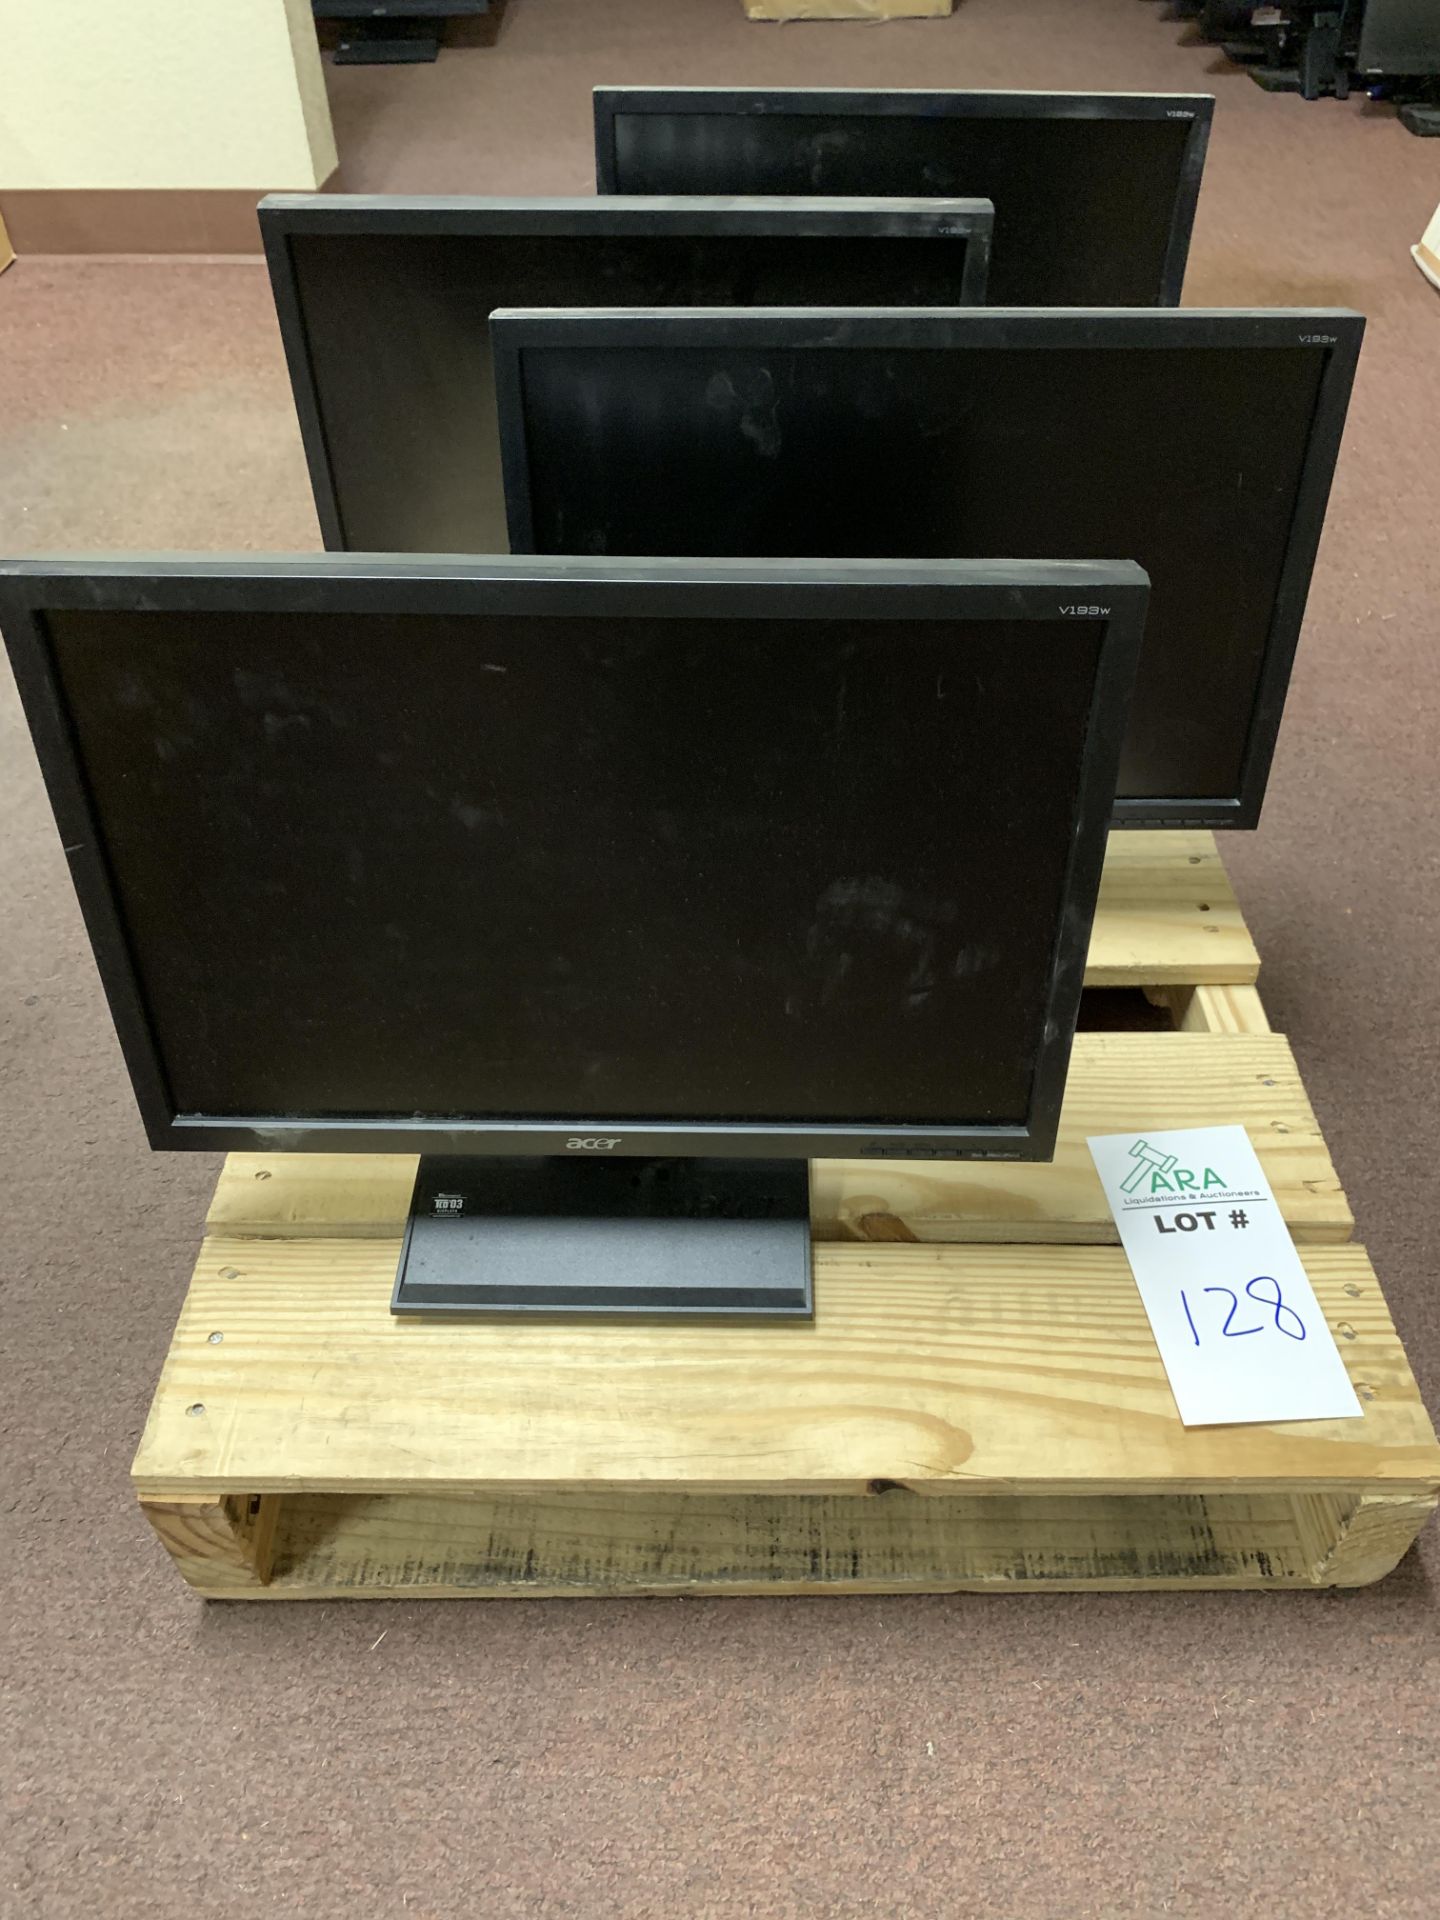 4 ACER V193W MONITORS.  ALL ITEMS ARE SOLD AS IS UNTESTED BUT CAME FROM A WORKING ENVIRONMENT. NOT - Image 3 of 4